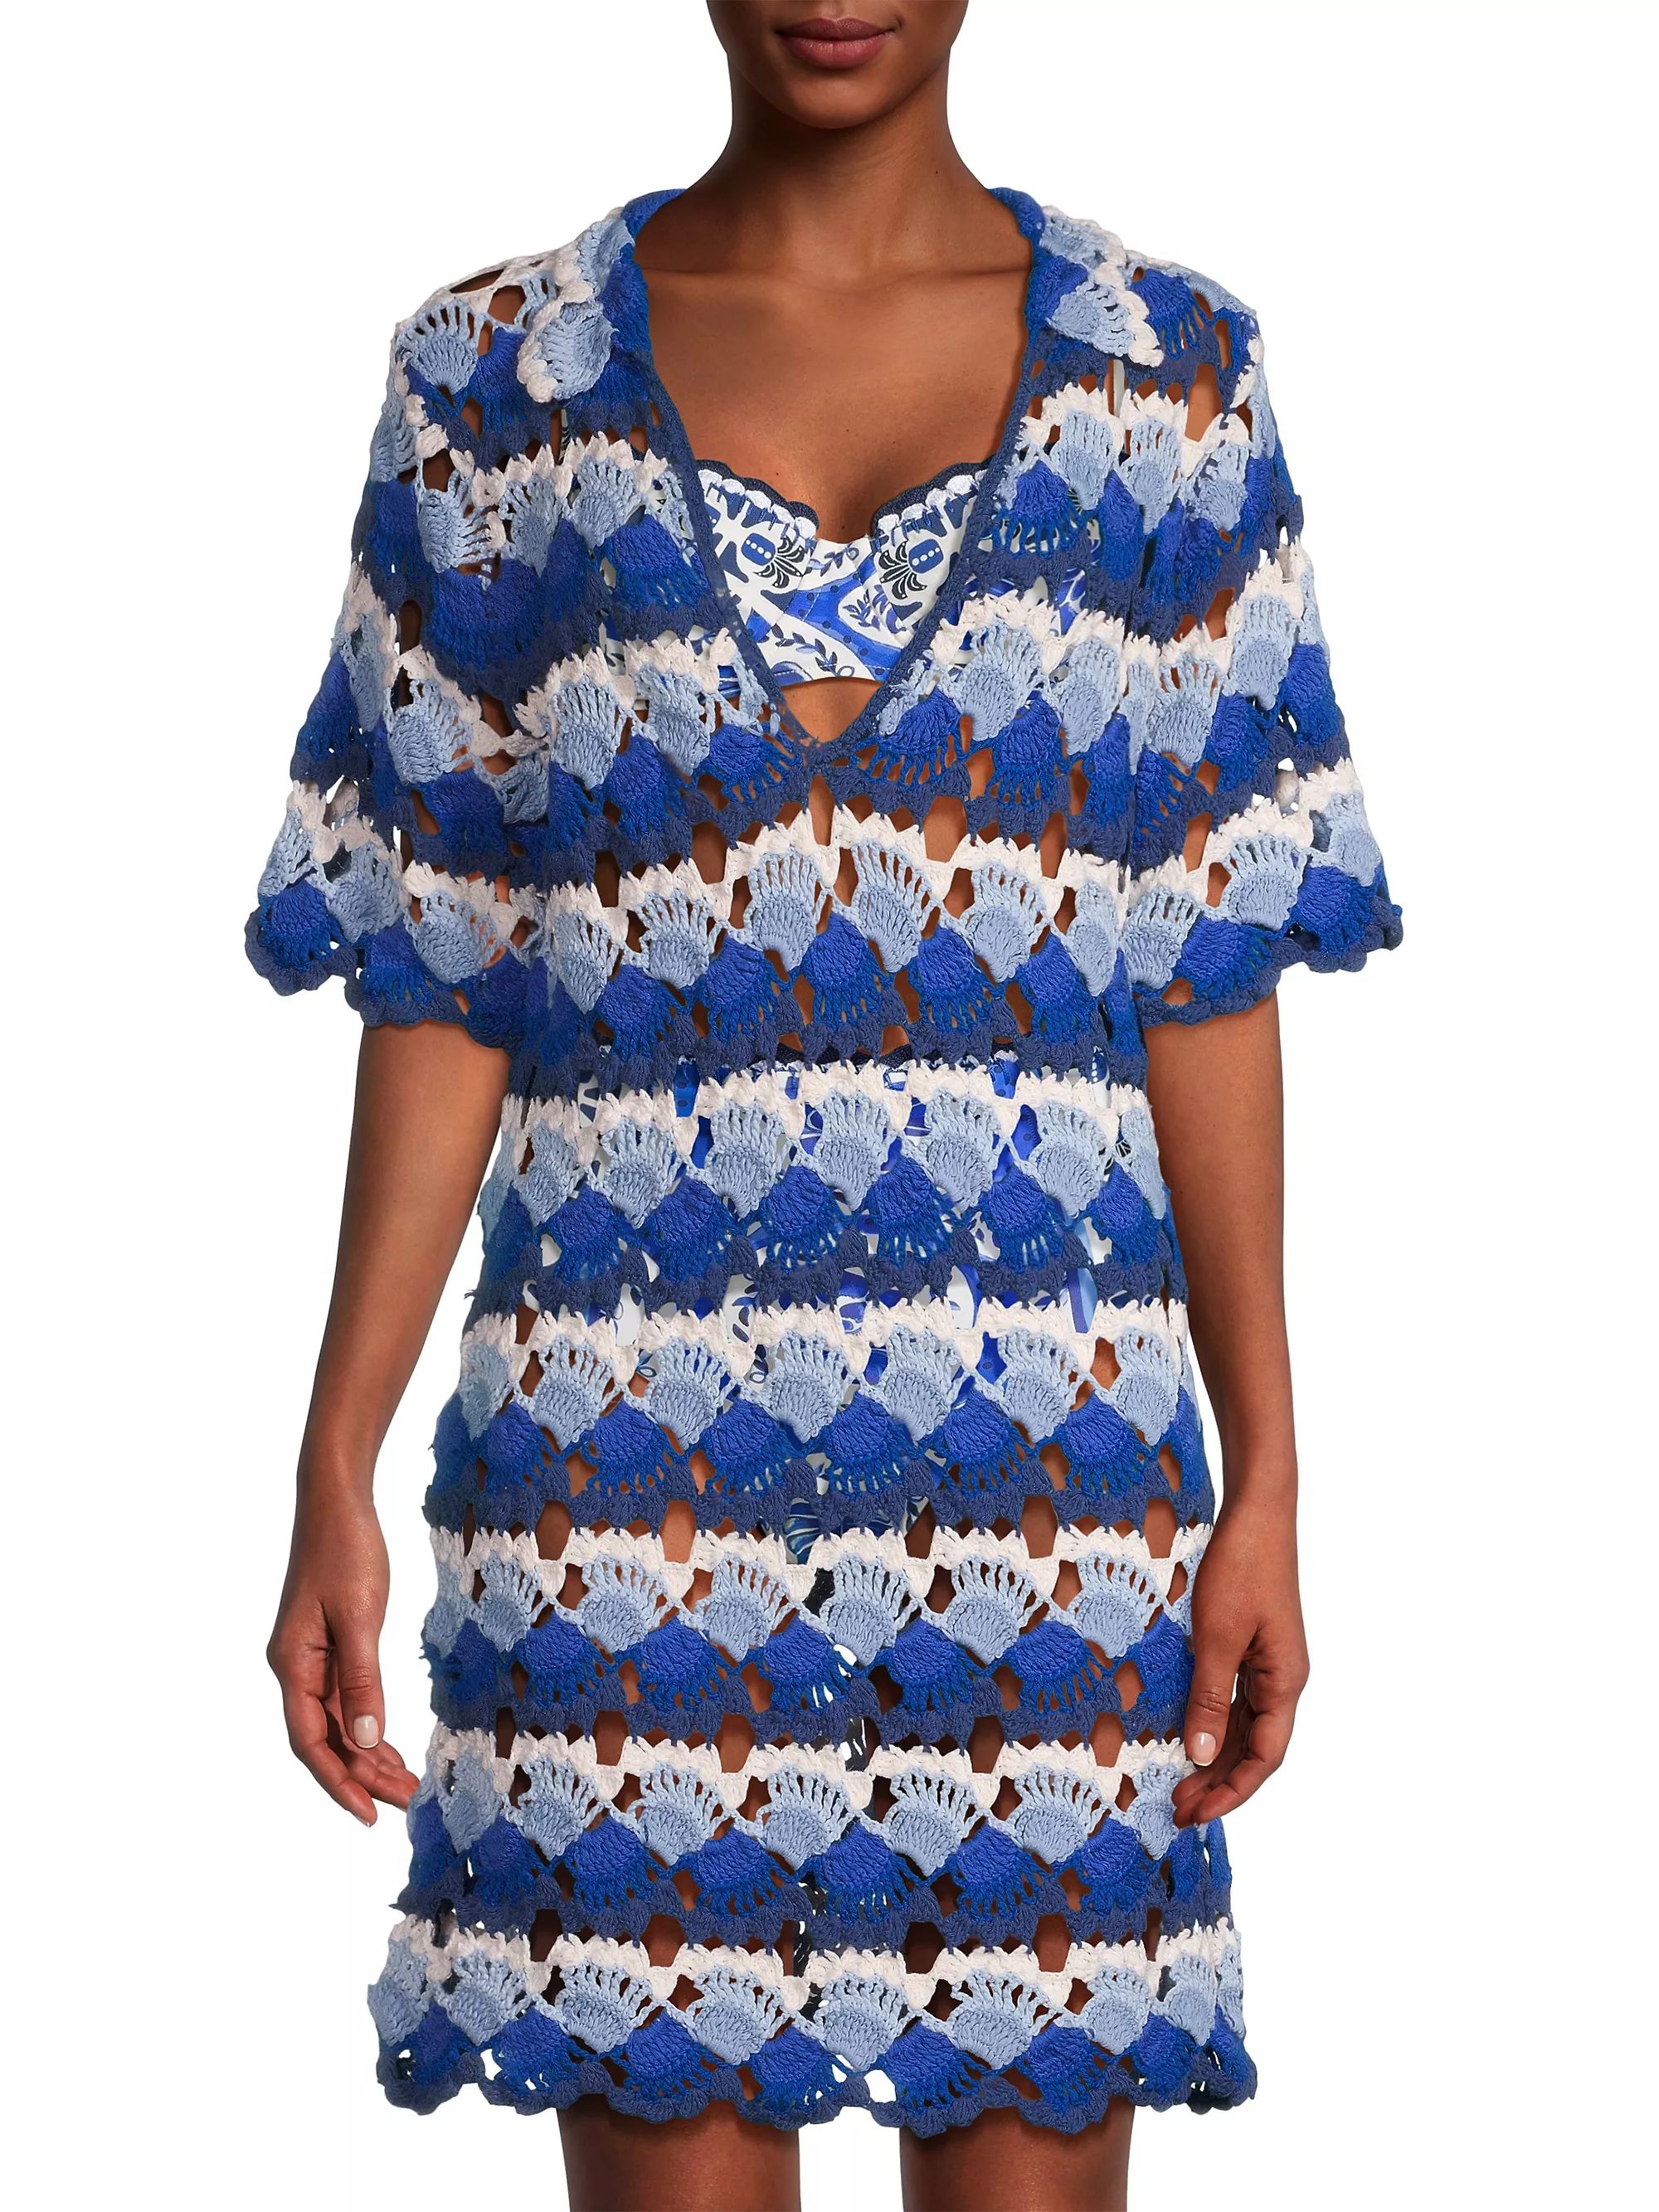 Striped Crocheted Cotton Cover-Up | Saks Fifth Avenue